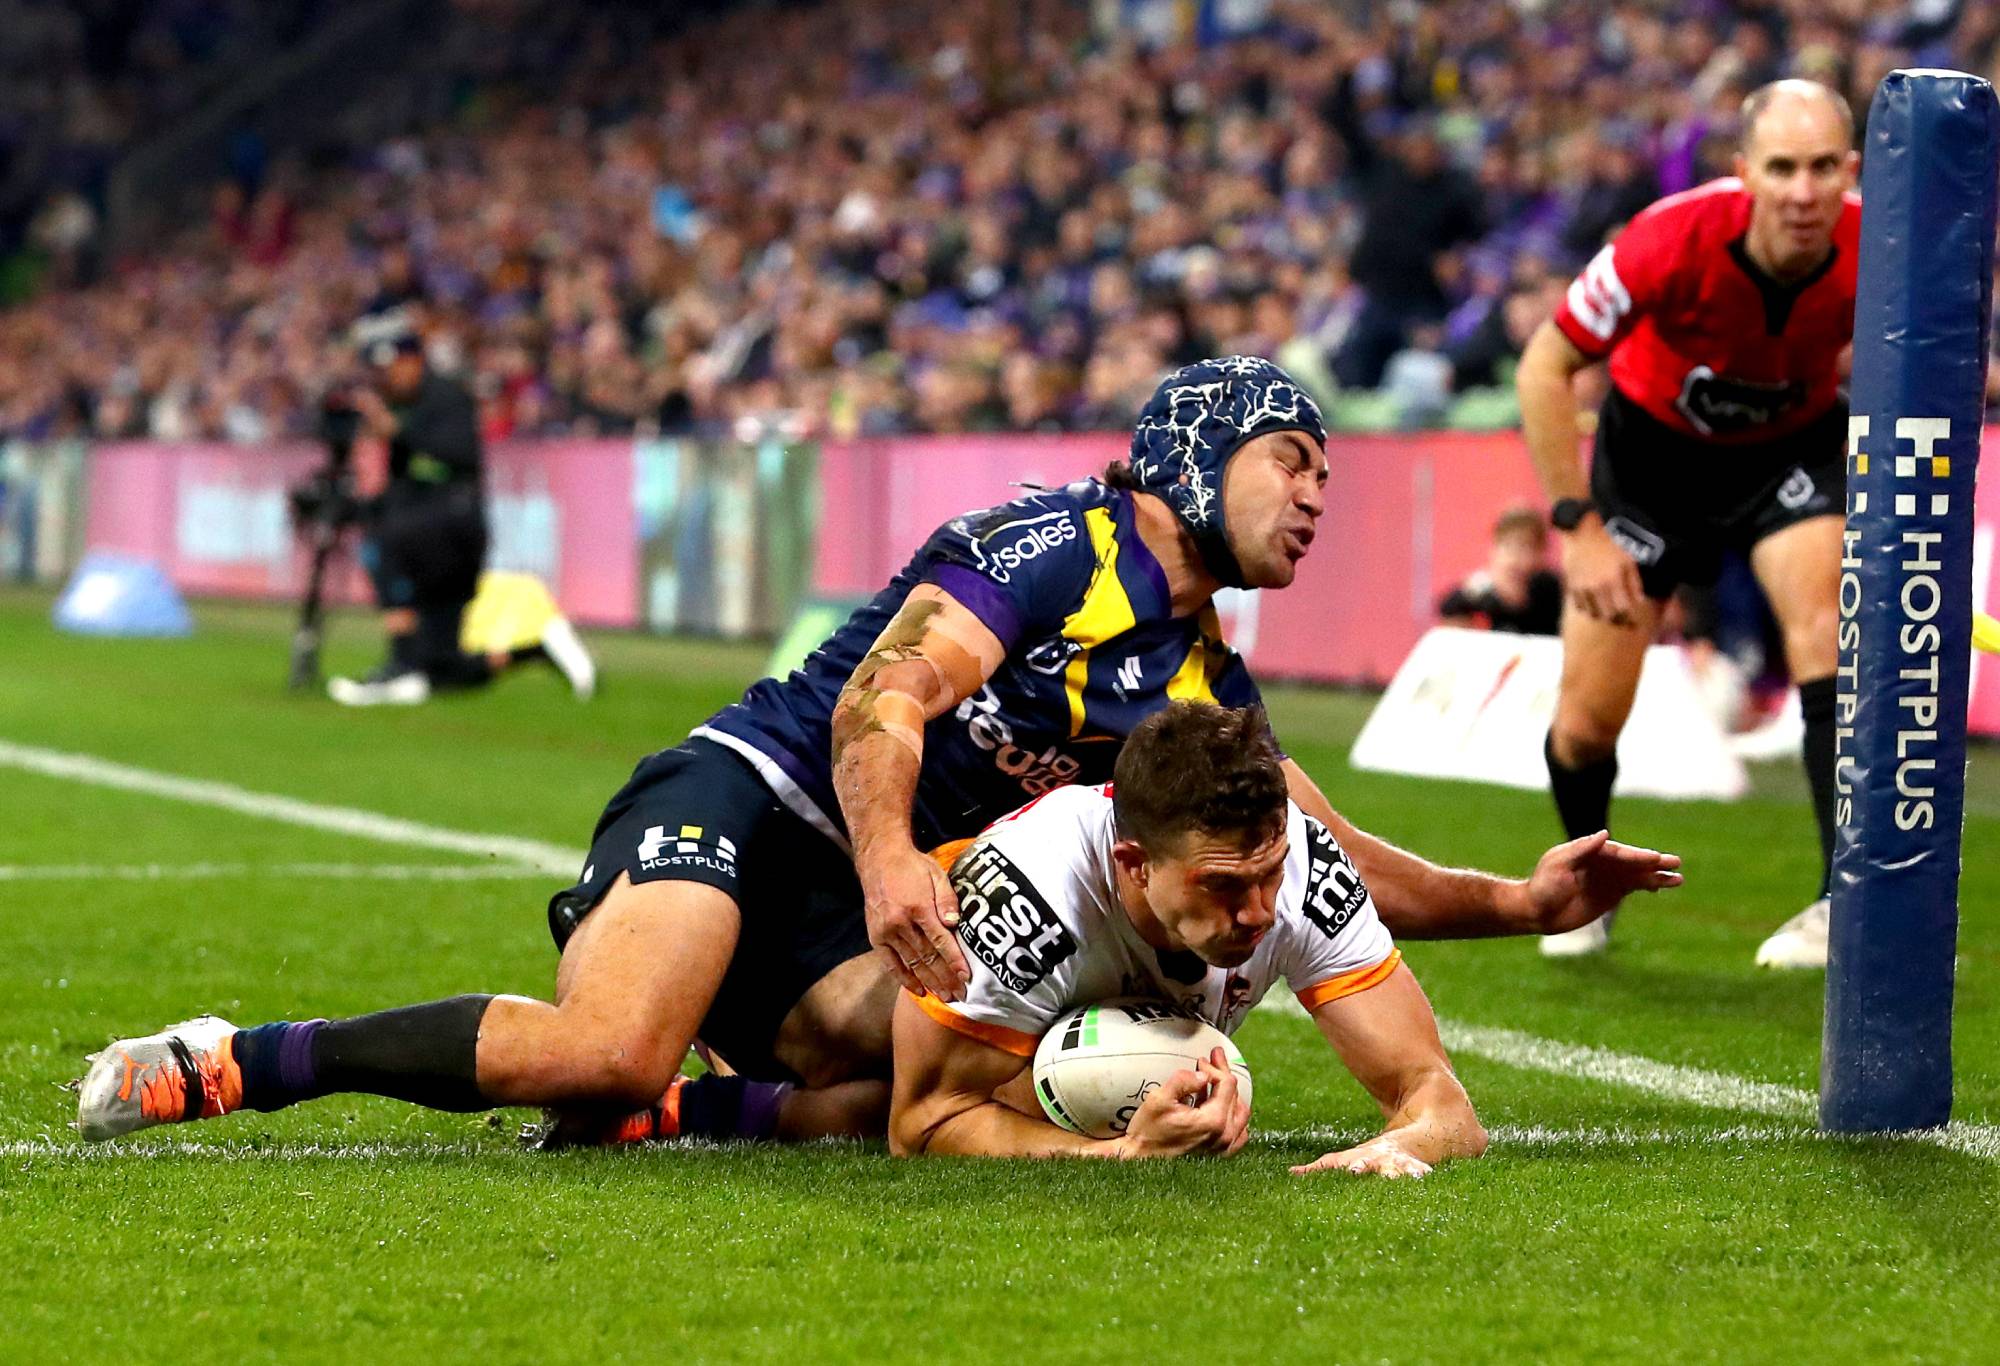 MELBOURNE, AUSTRALIA - JUNE 17: Corey Oates of the Broncos scores a try under pressure from Jahrome Hughes of the Storm during the round 15 NRL match between the Melbourne Storm and the Brisbane Broncos at AAMI Park, on June 17, 2022, in Melbourne, Australia. (Photo by Kelly Defina/Getty Images)